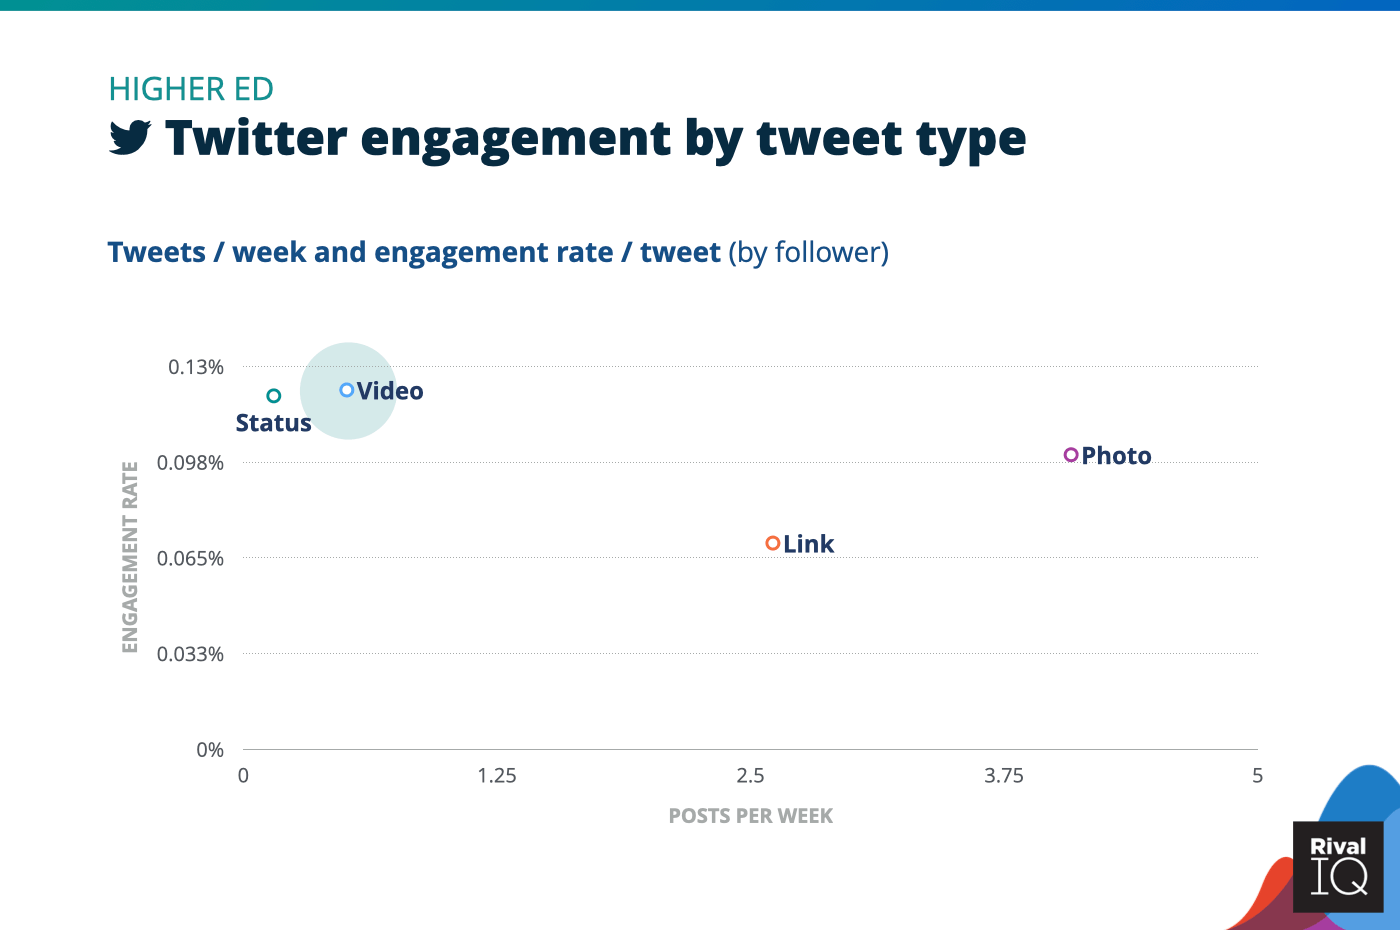 Chart of Twitter posts per week and engagement rate by tweet type, Higher Ed